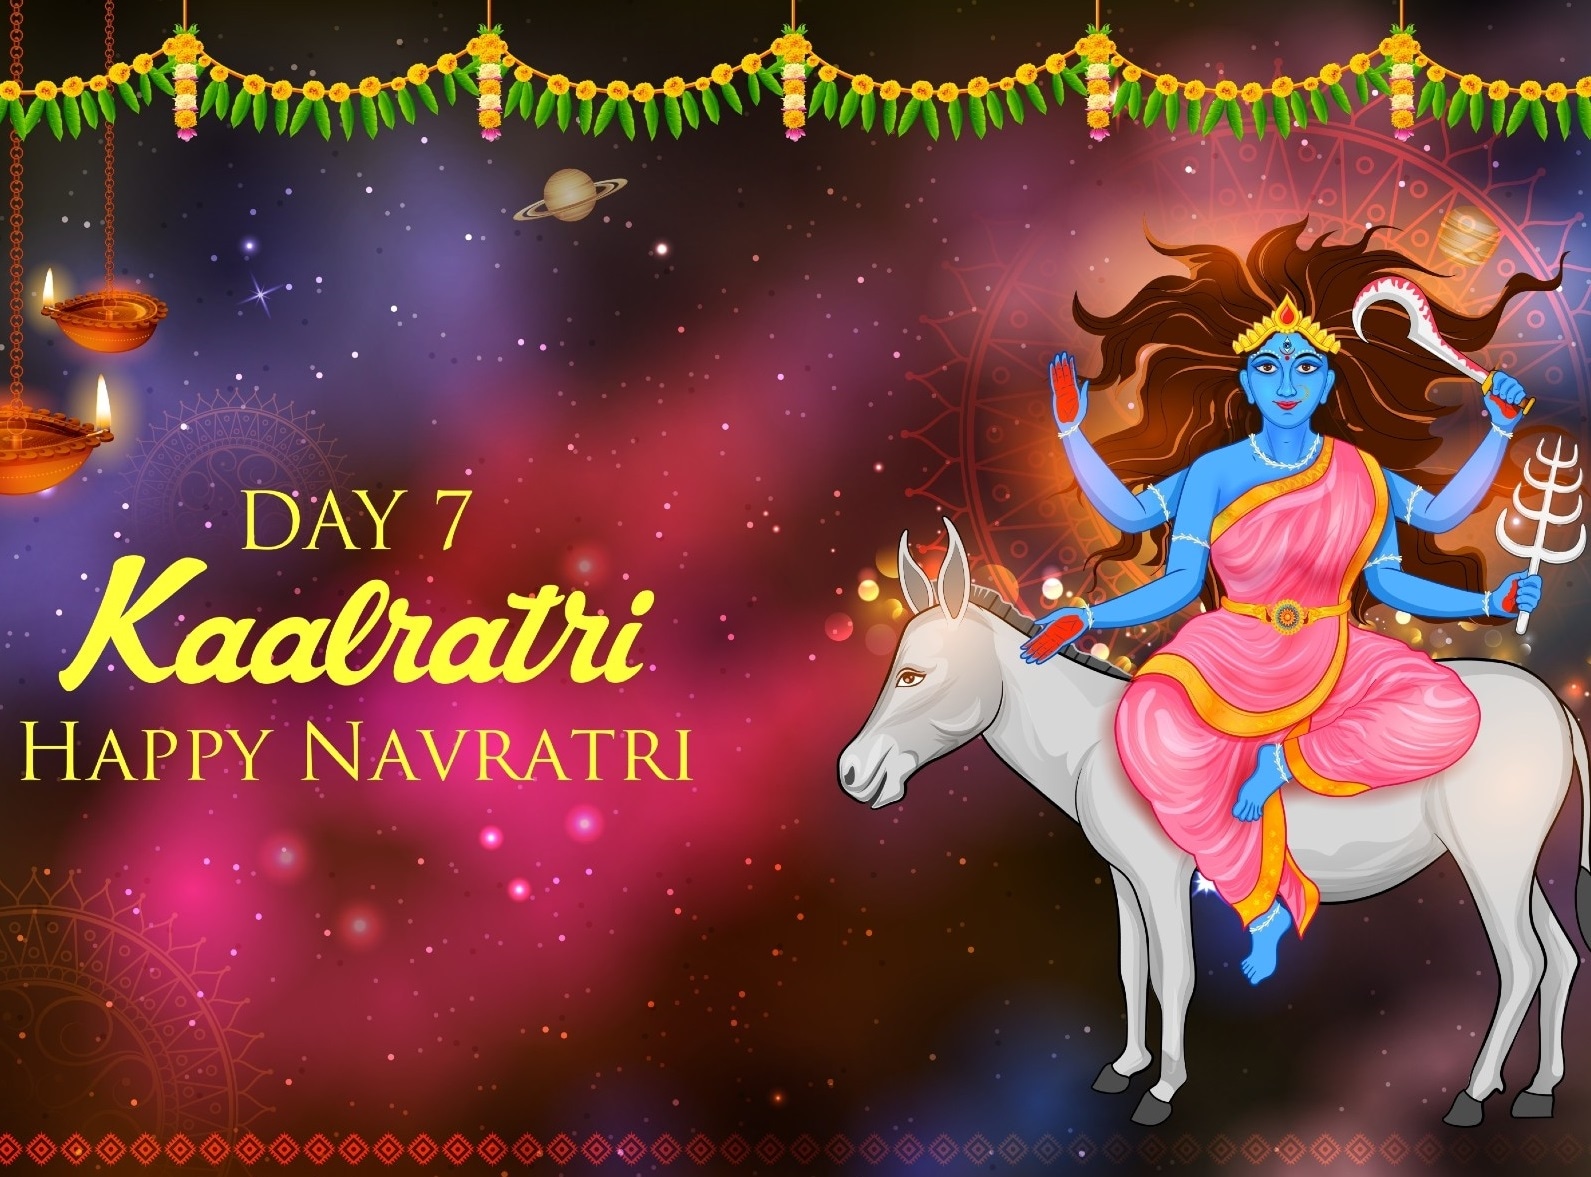 Navratri 2022 Day 7: Maa Kaalratri is regarded as a divine luminary and an unending wellspring of knowledge. (Representative image)